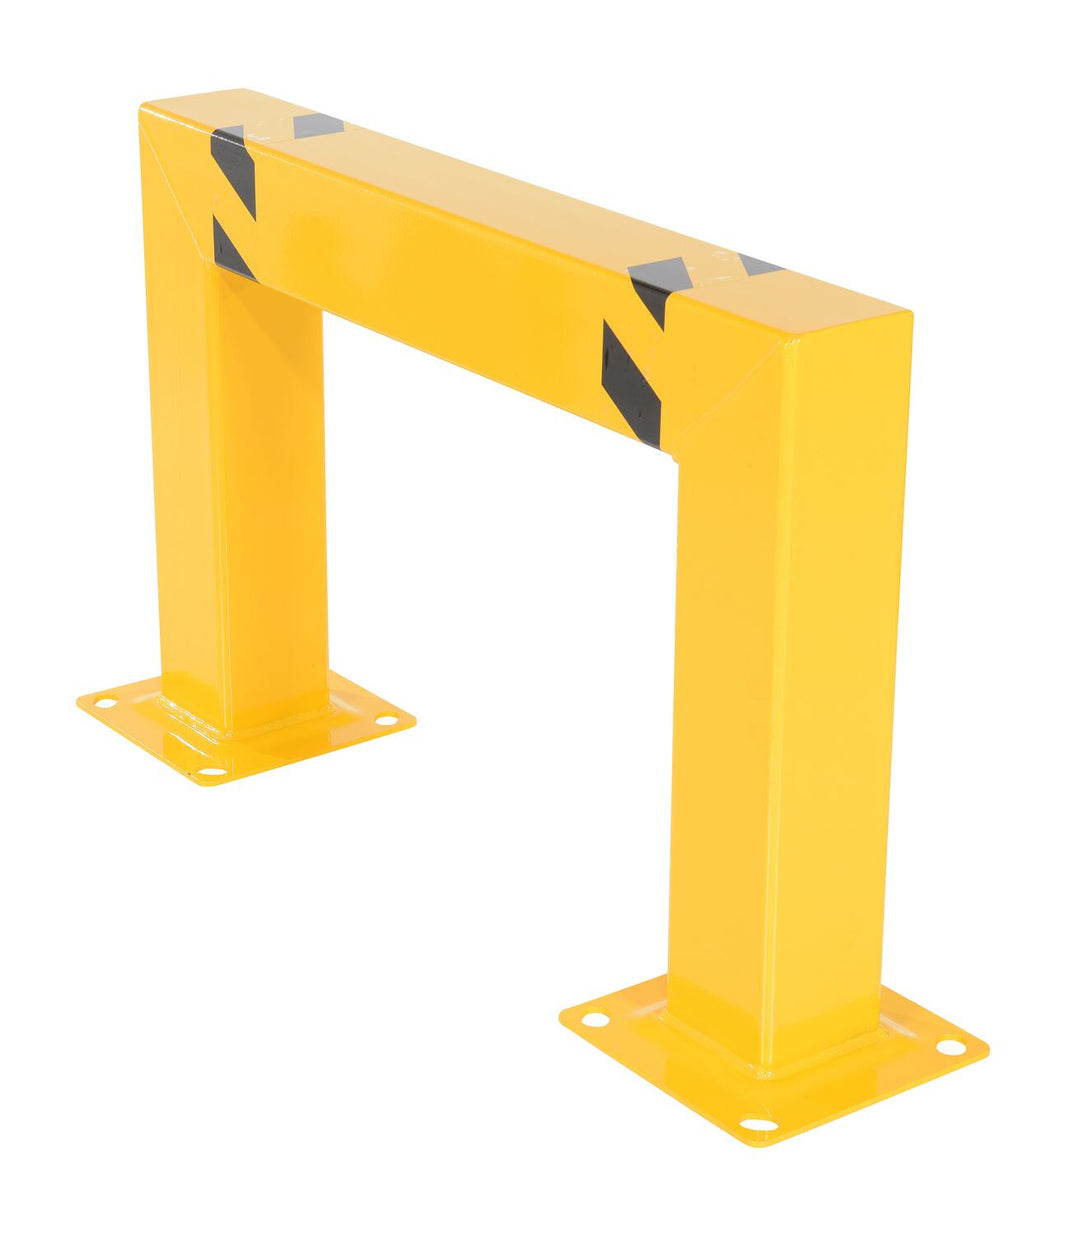 TAIMCO High Profile Machinery Protection Guards - Made in Canada - Model # P896